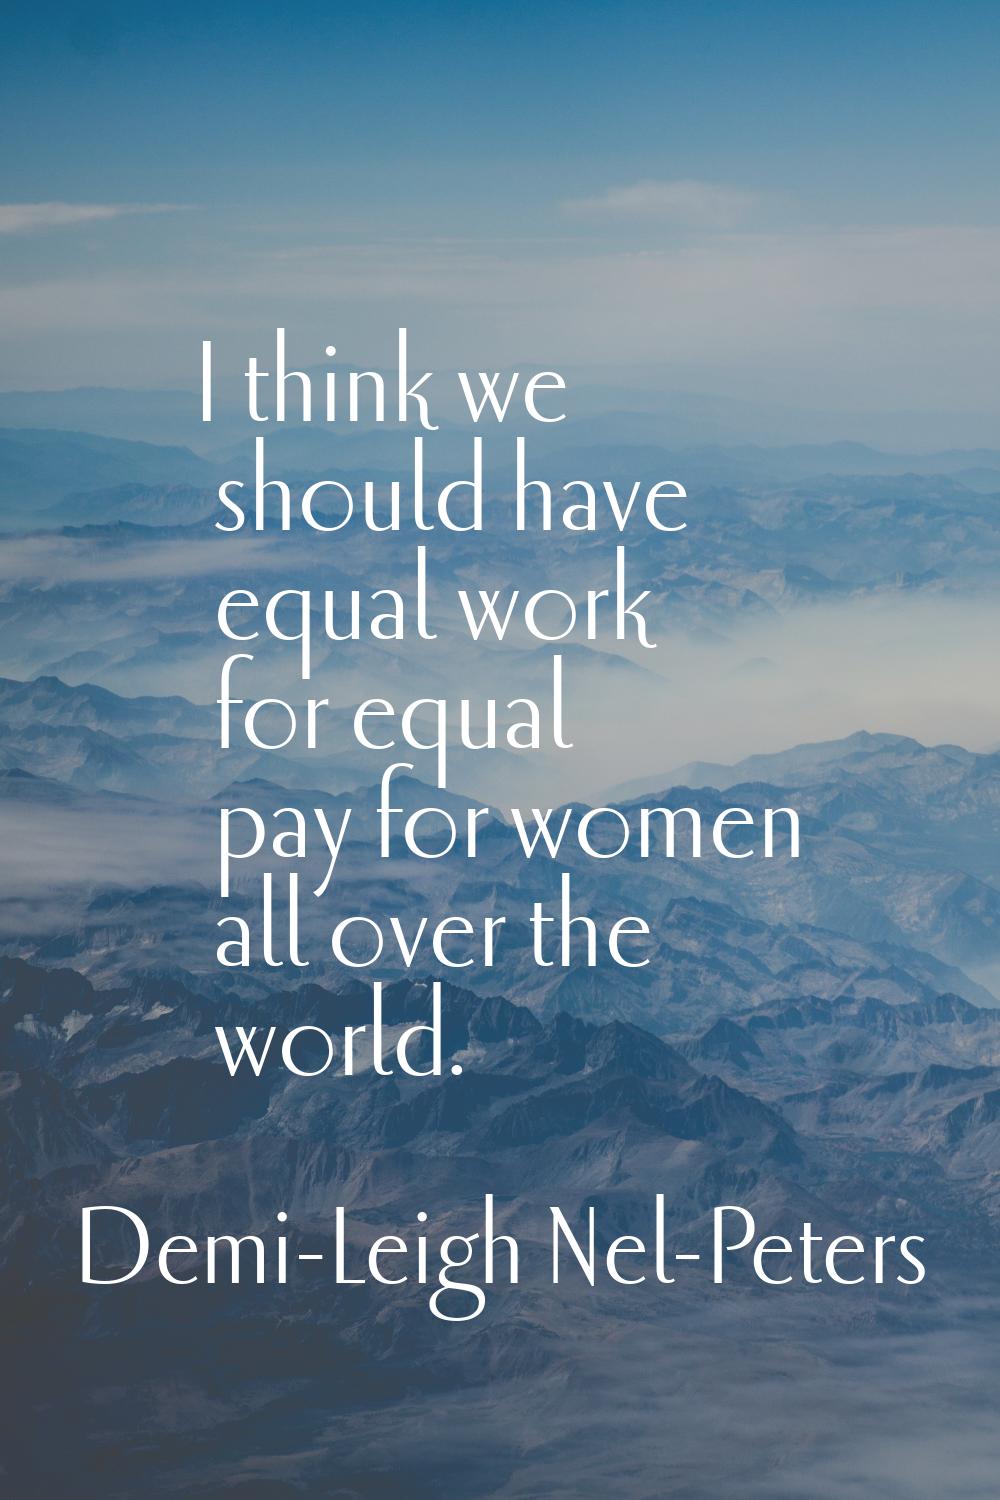 I think we should have equal work for equal pay for women all over the world.